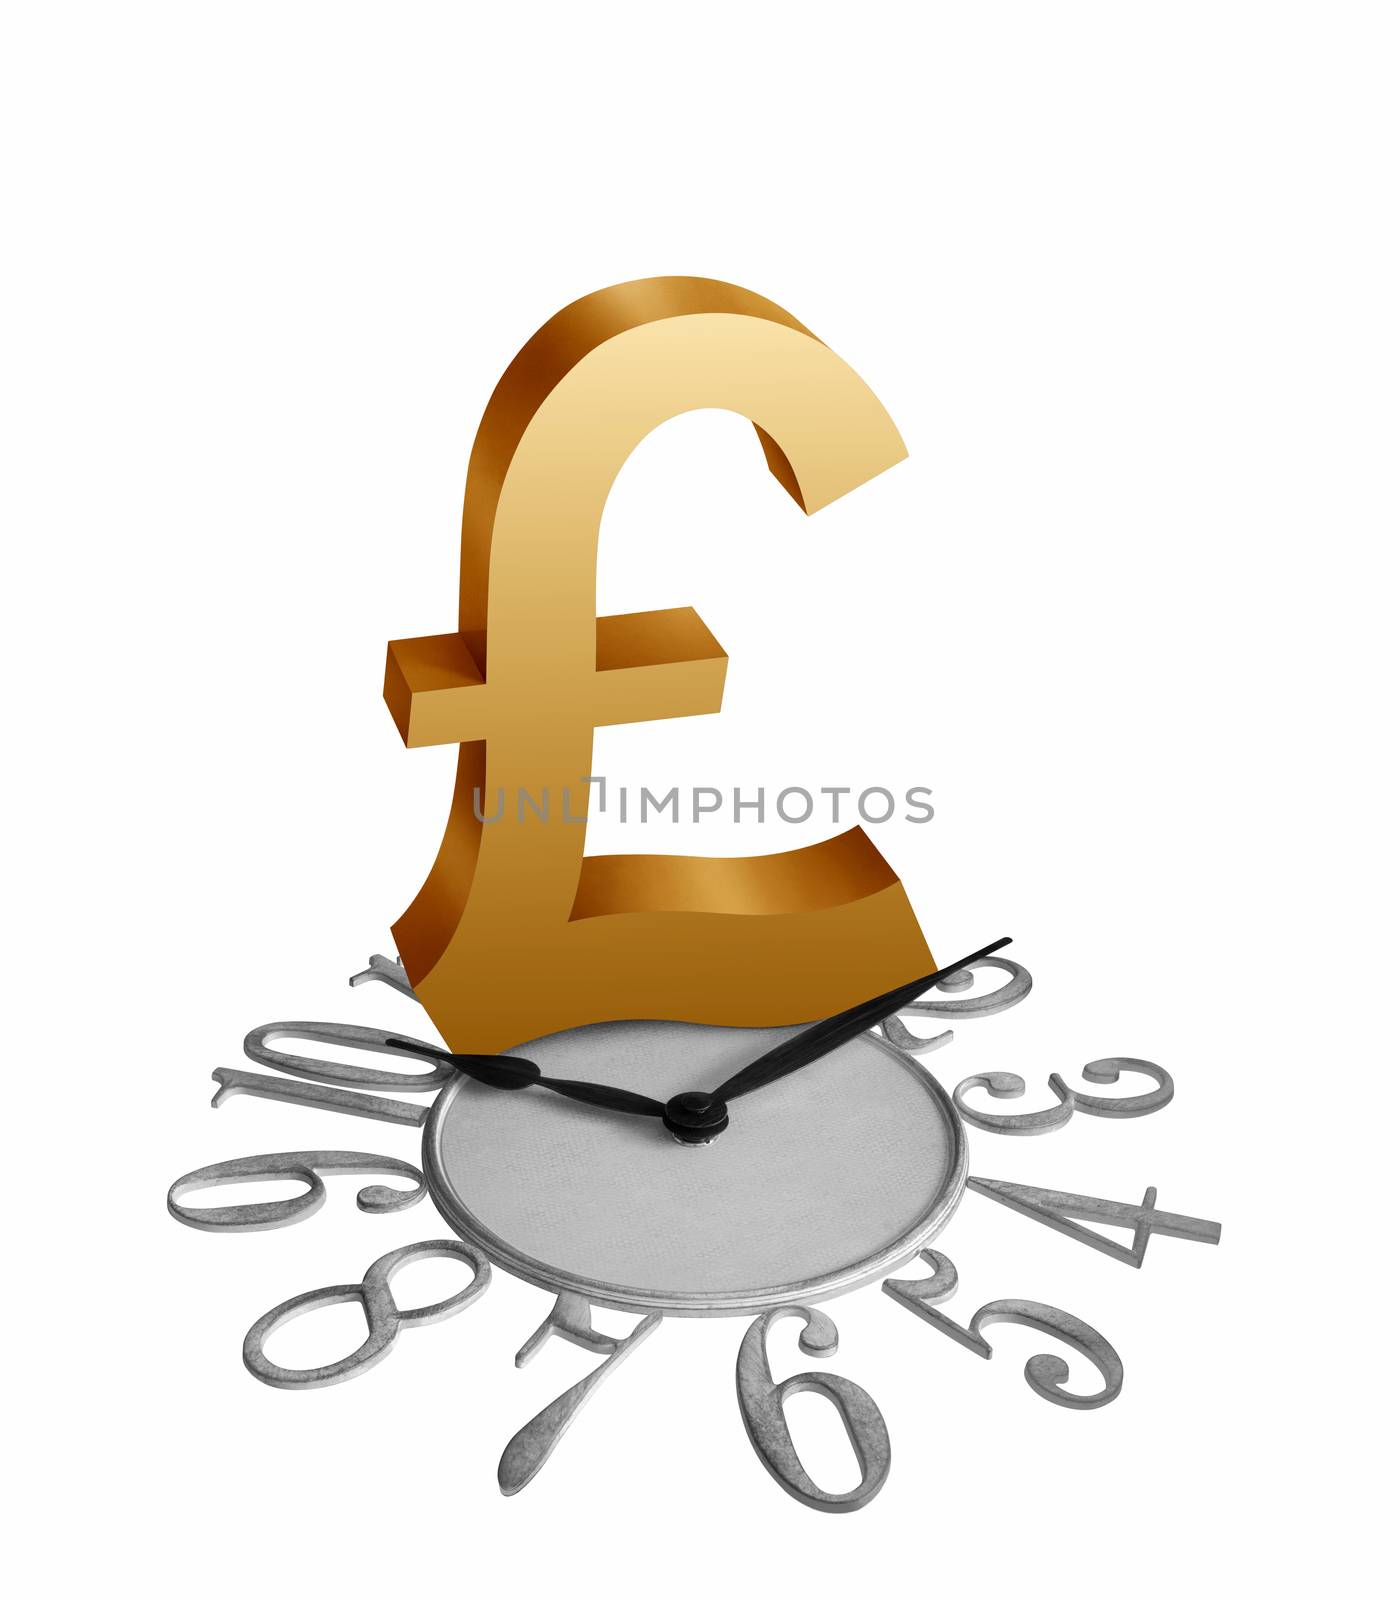 Golden pound sign or symbol on a clock isolated in white background